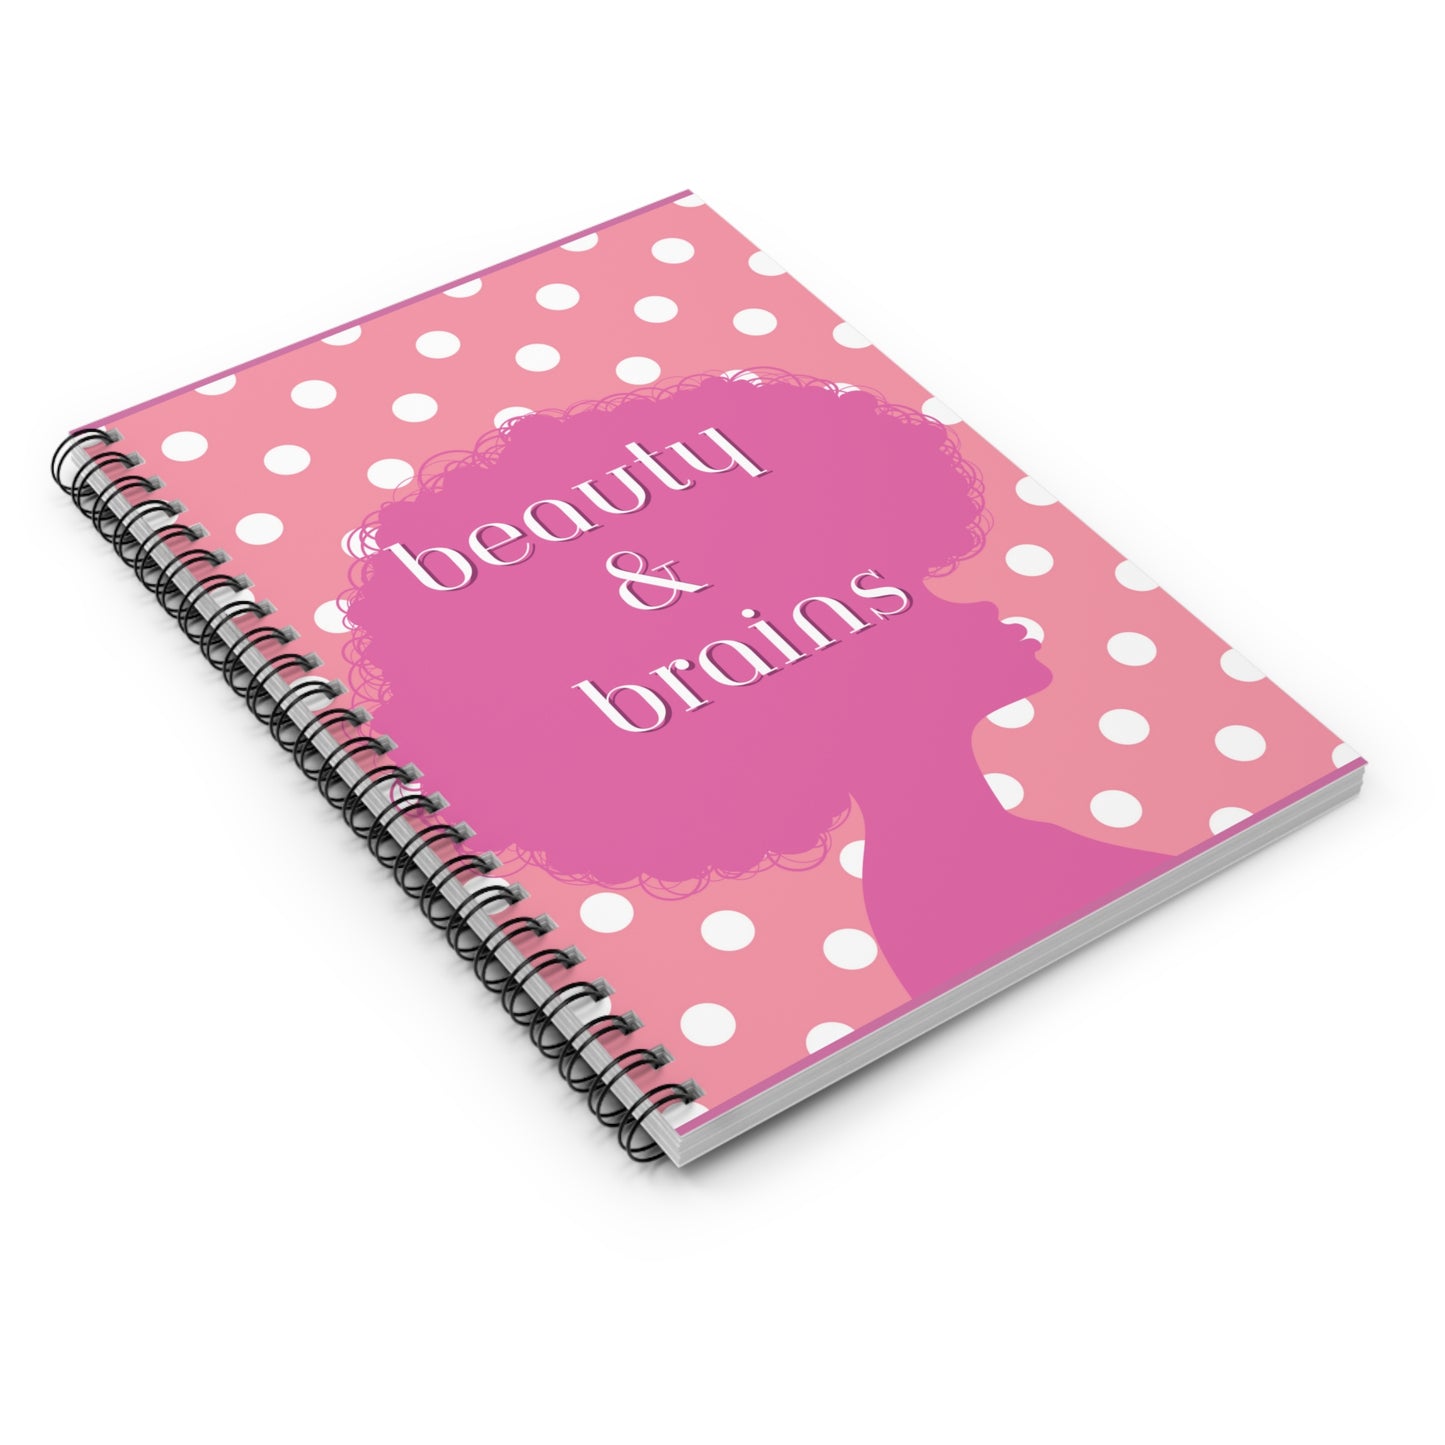 Beauty & Brains Spiral Notebook - College Ruled Lines 6"x8"